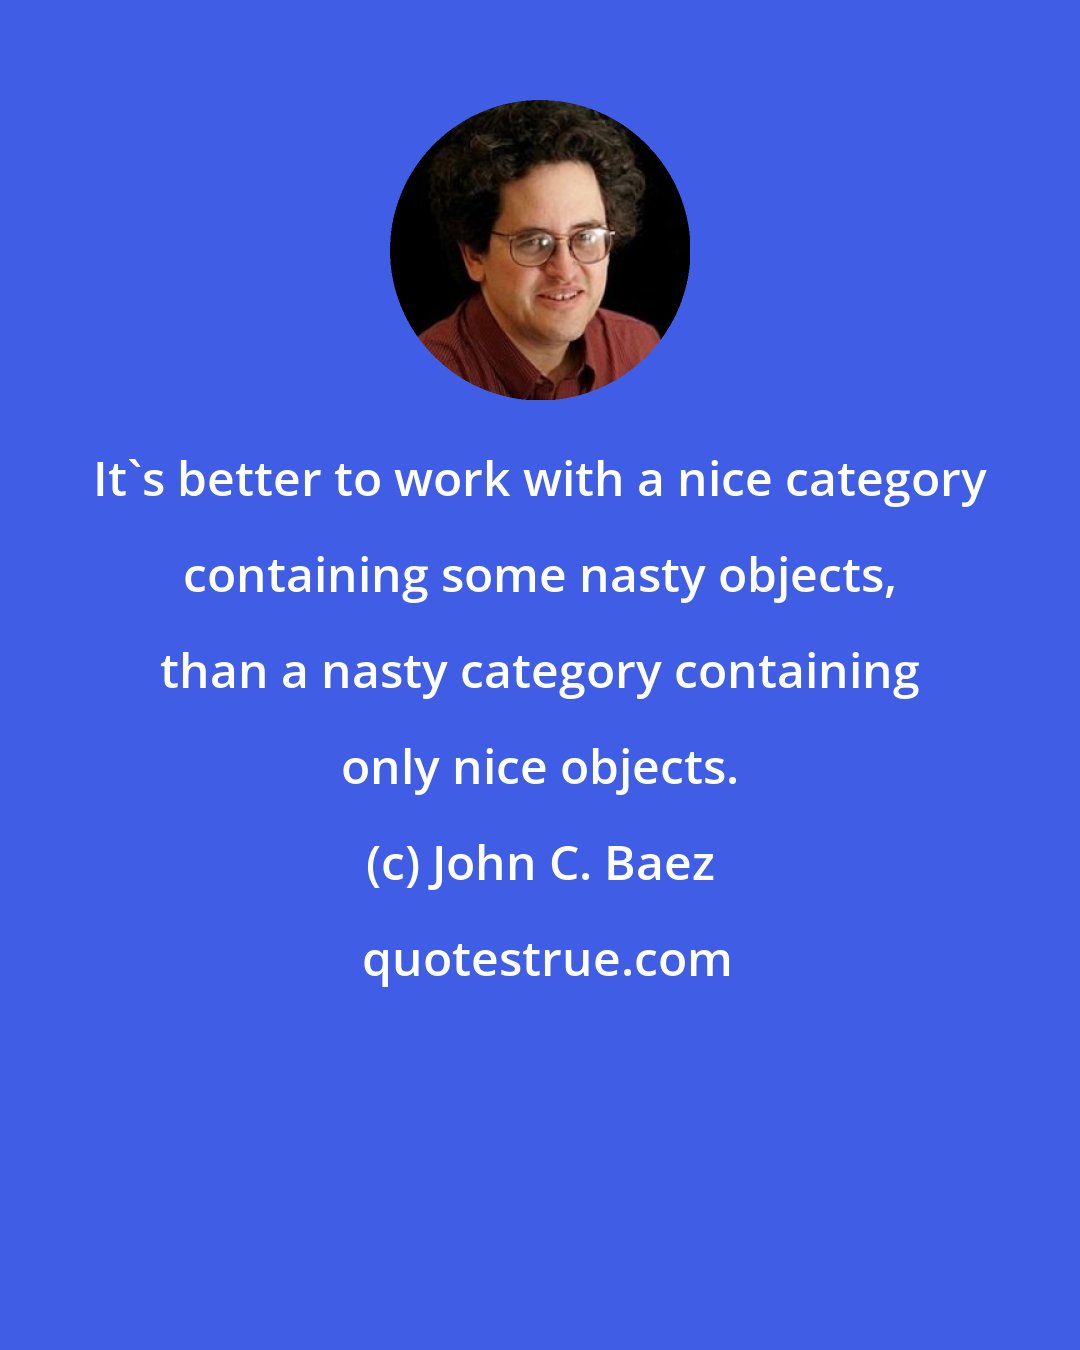 John C. Baez: It's better to work with a nice category containing some nasty objects, than a nasty category containing only nice objects.